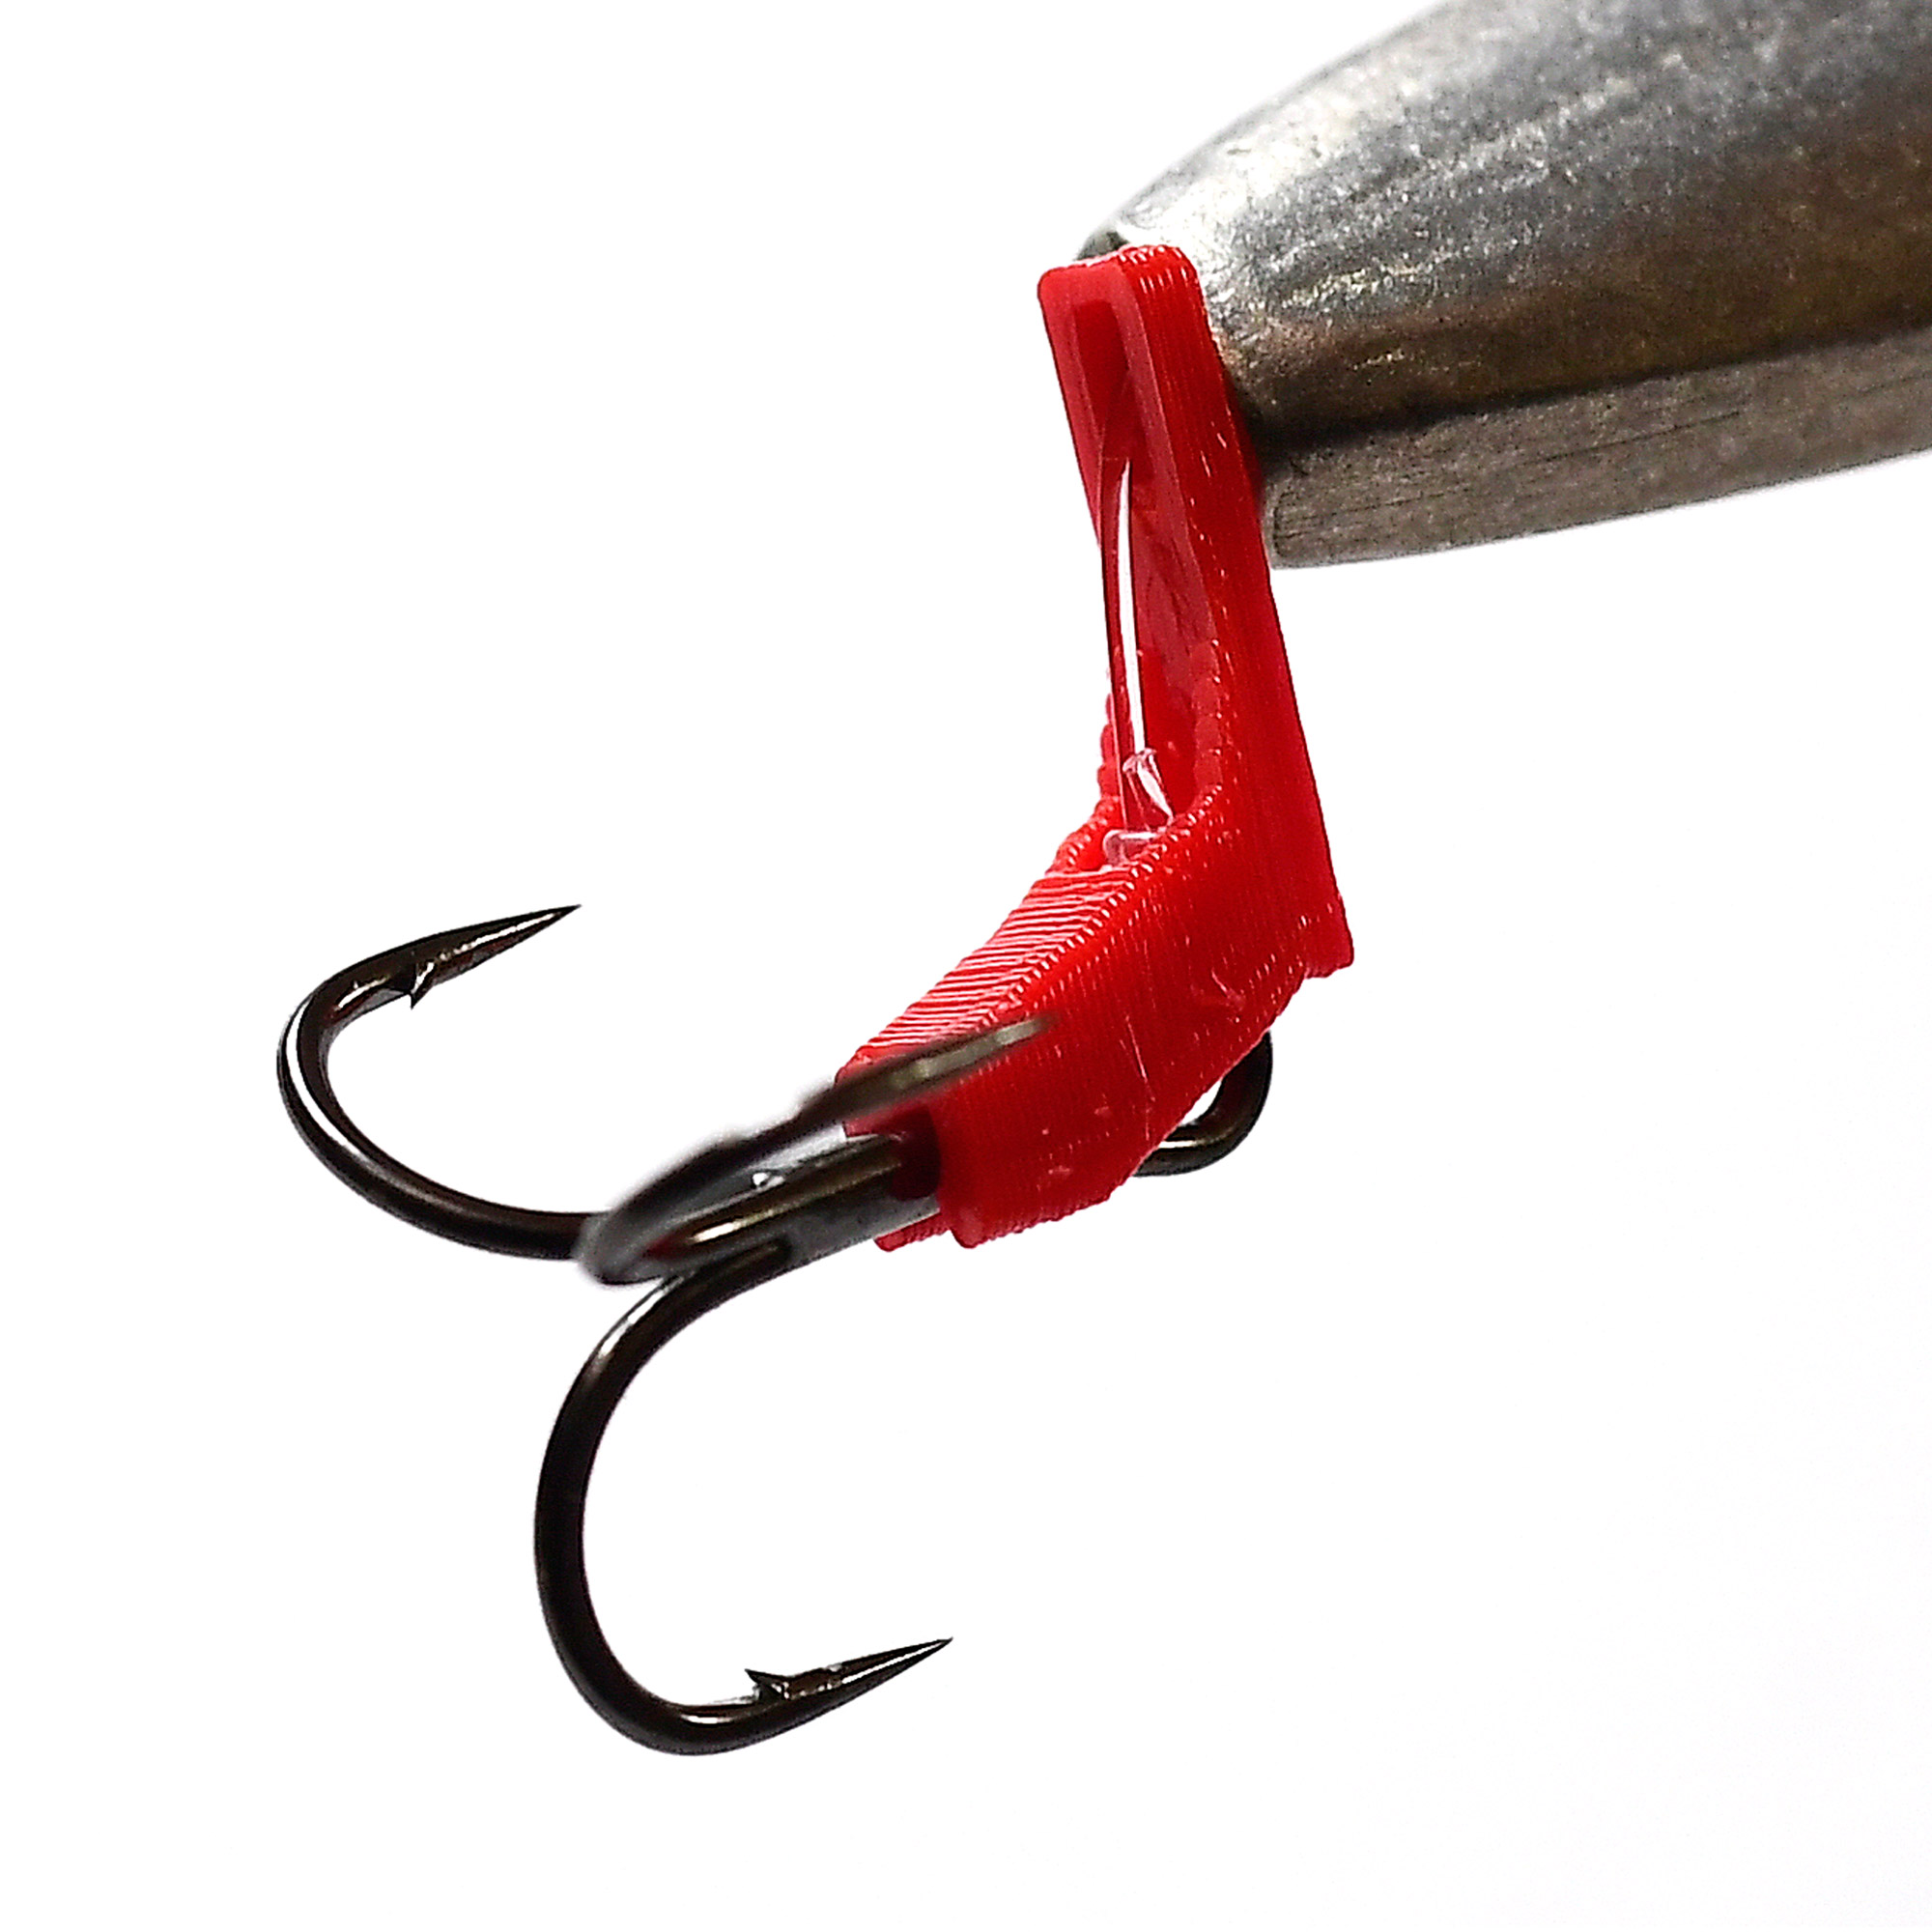 RELEASE CONNECTOR by Jens Bursell for seatrout and salmon - Releaserigshop